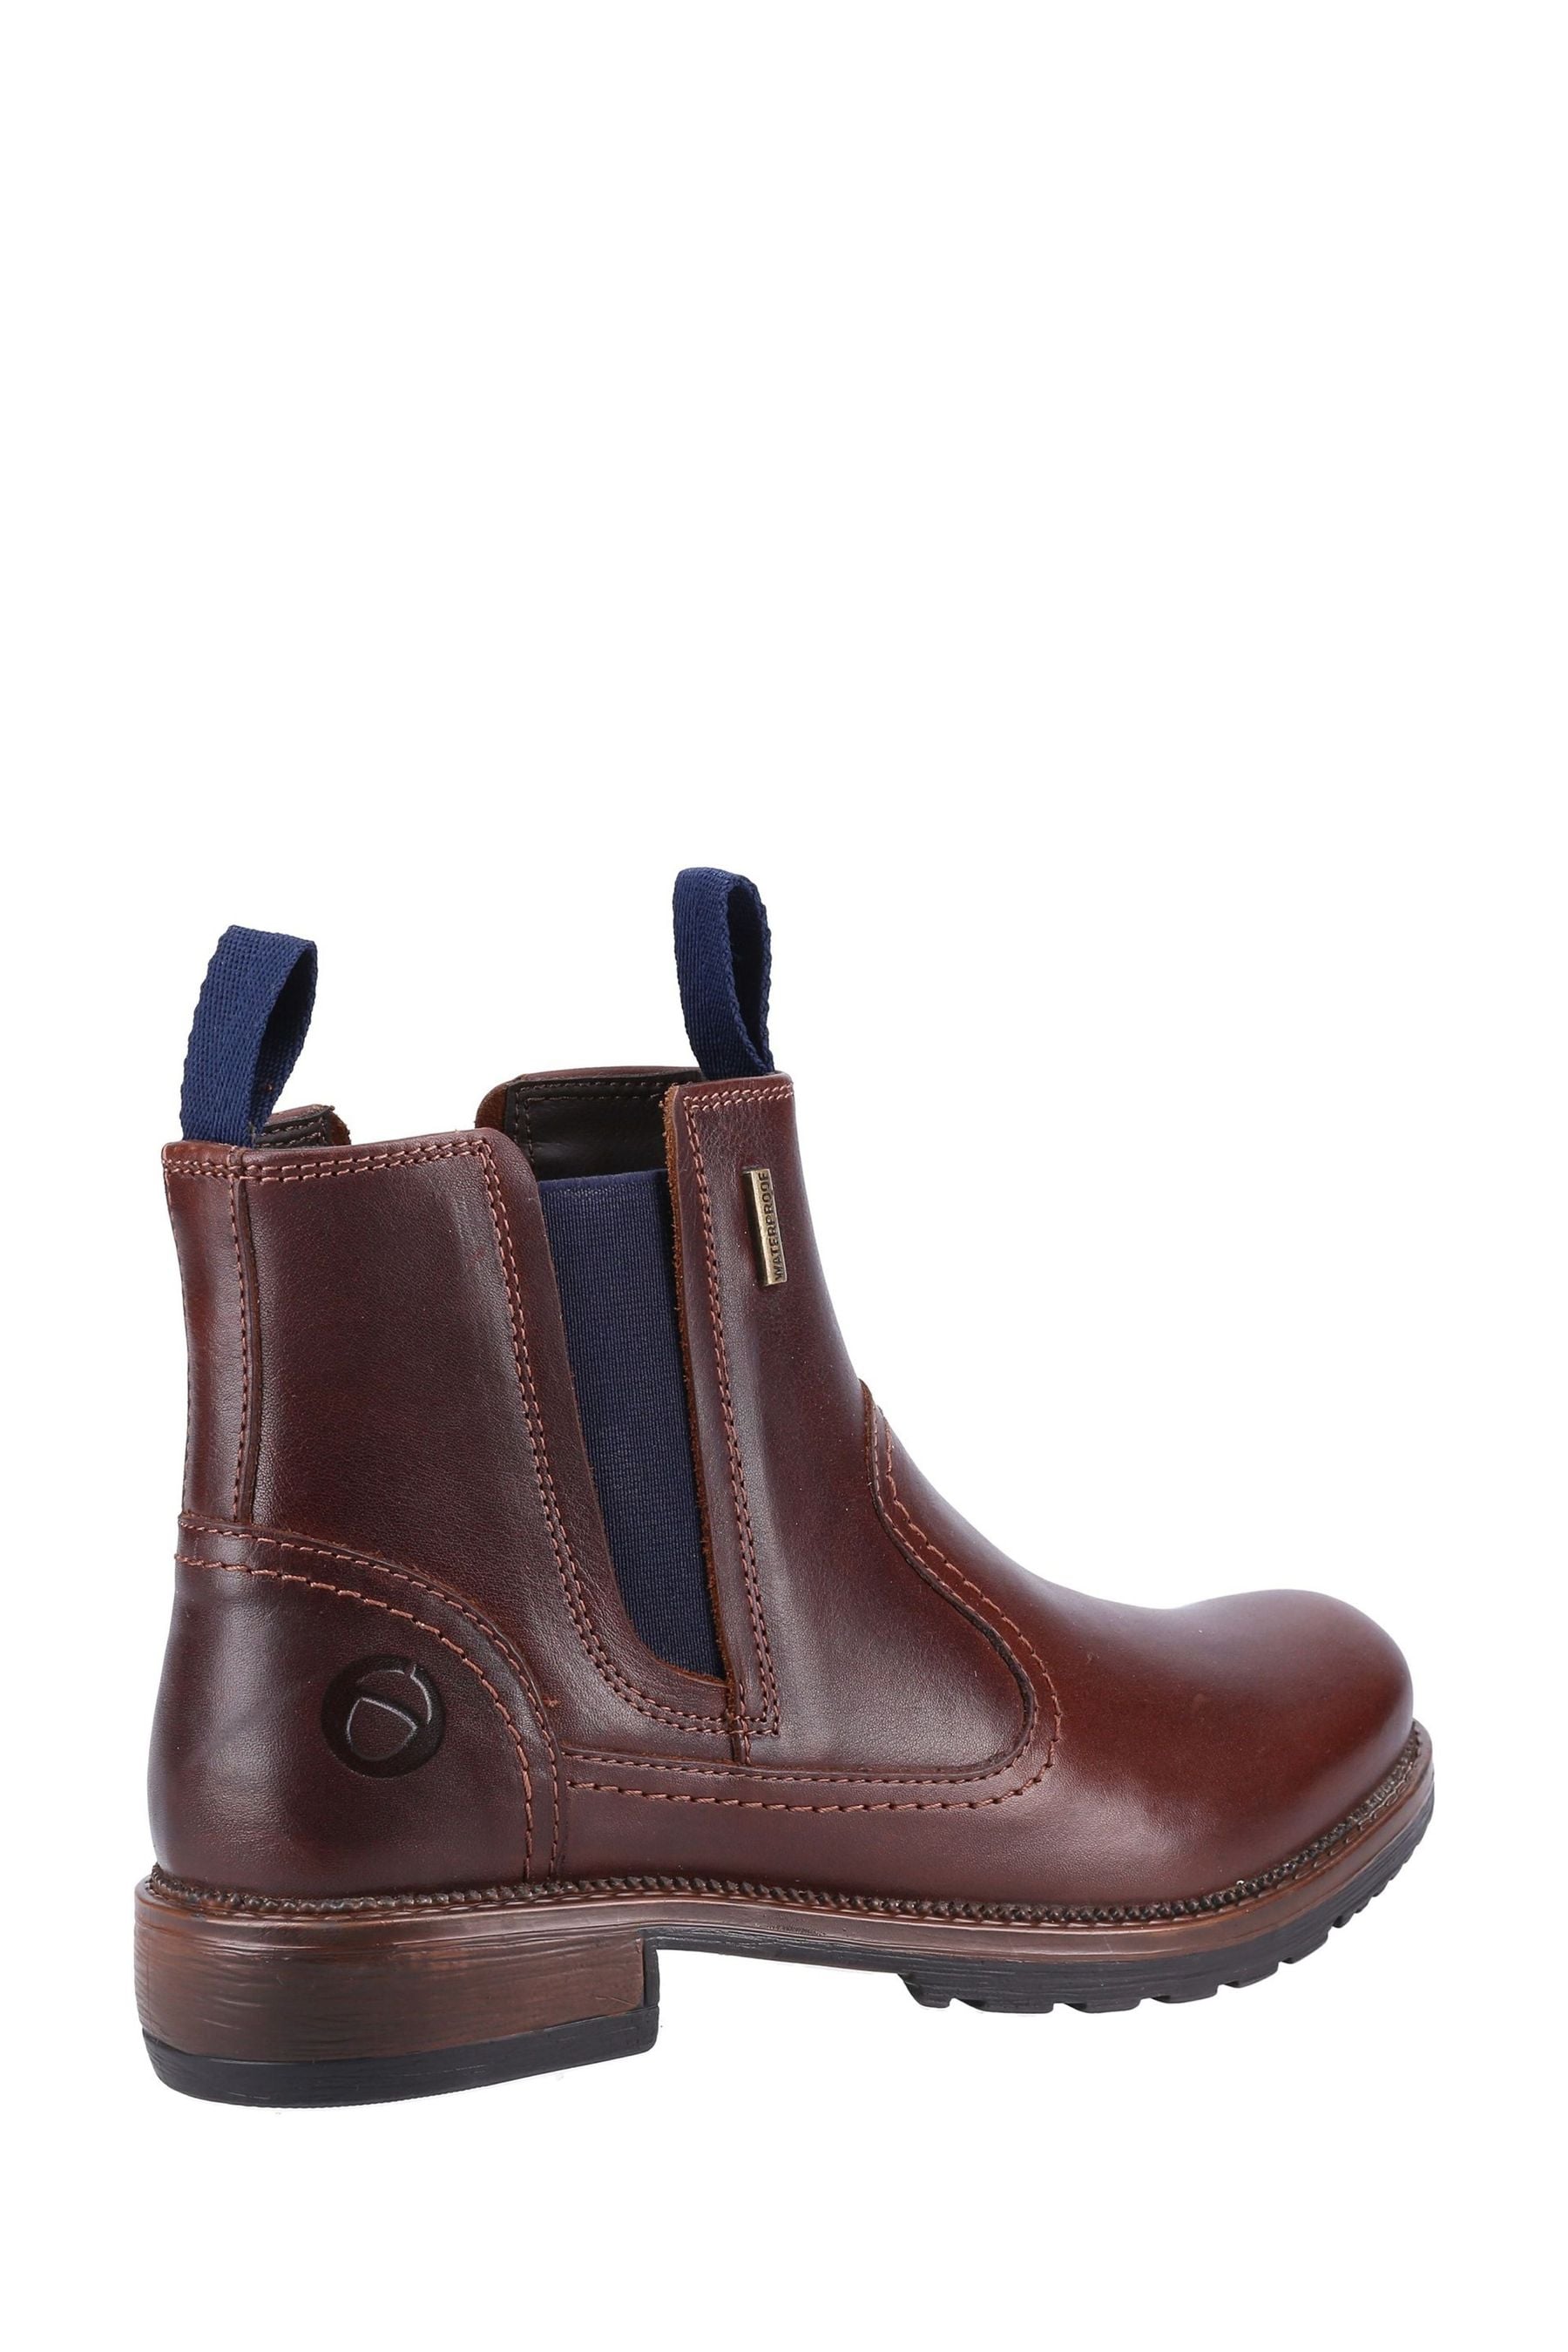 Buy Cotswolds Laverton Ankle Brown Boots from the Next UK online shop